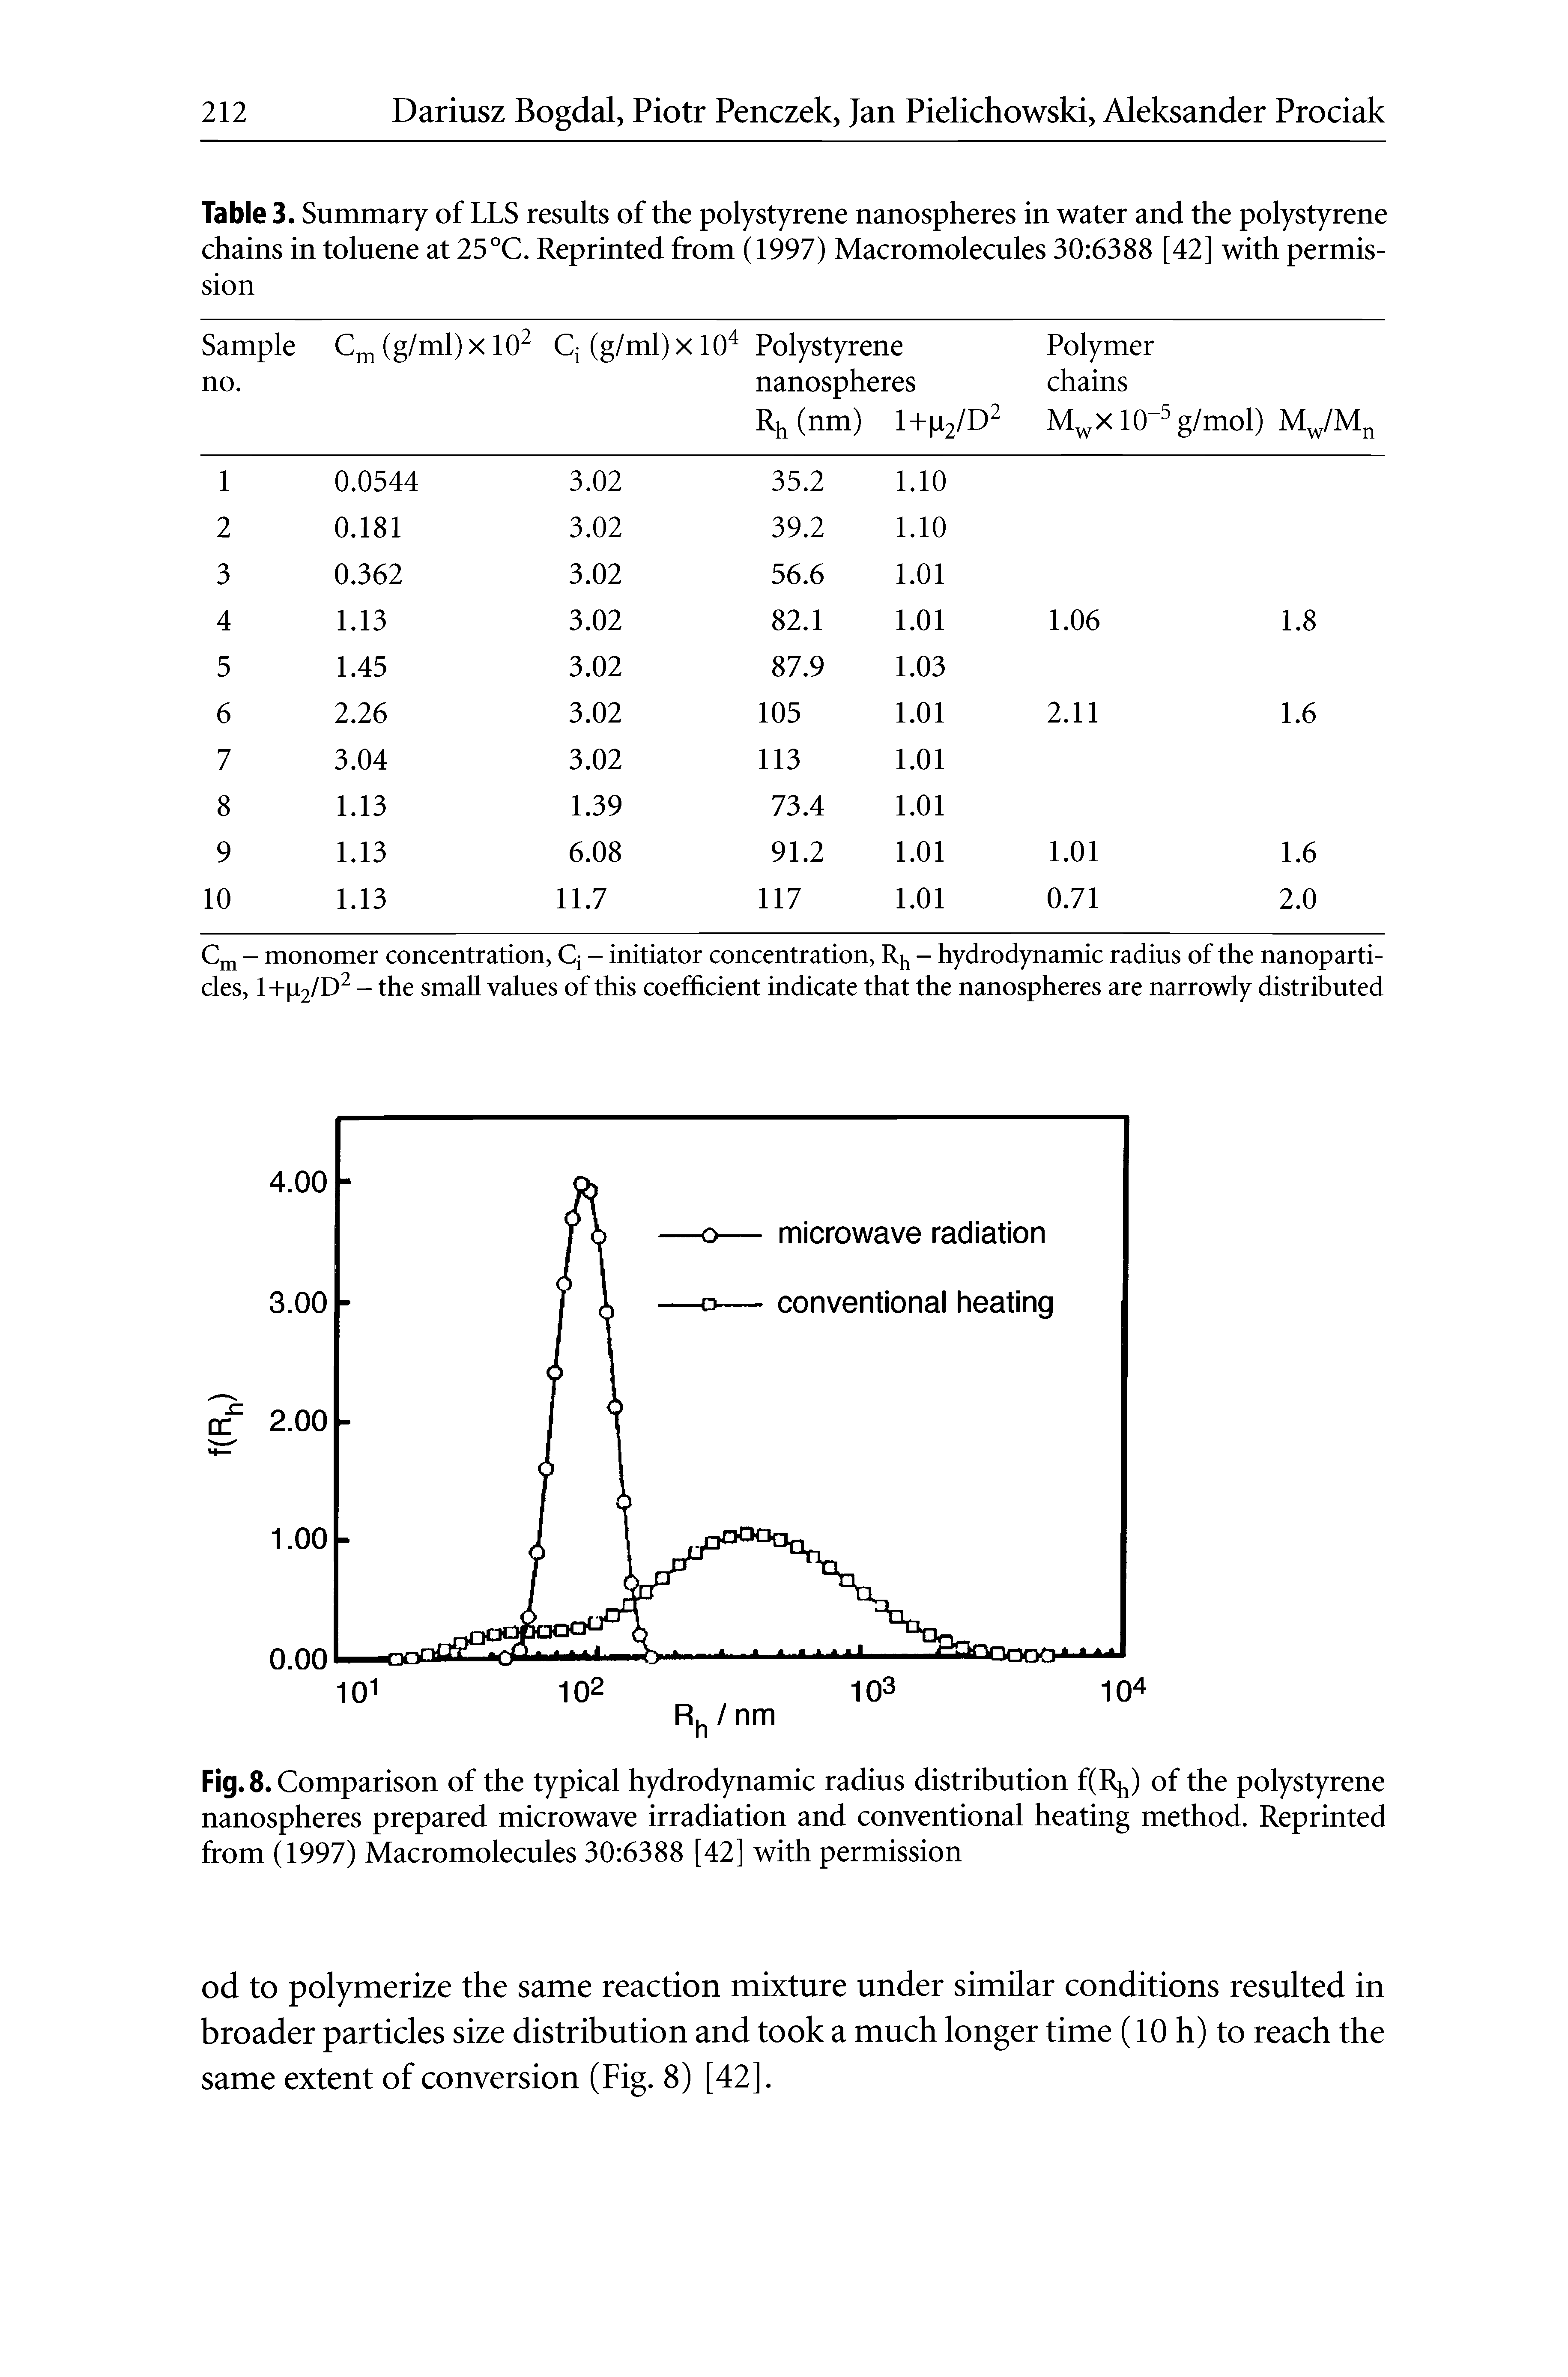 Fig. 8. Comparison of the typical hydrodynamic radius distribution f(Rh) of the polystyrene nanospheres prepared microwave irradiation and conventional heating method. Reprinted from (1997) Macromolecules 30 6388 [42] with permission...